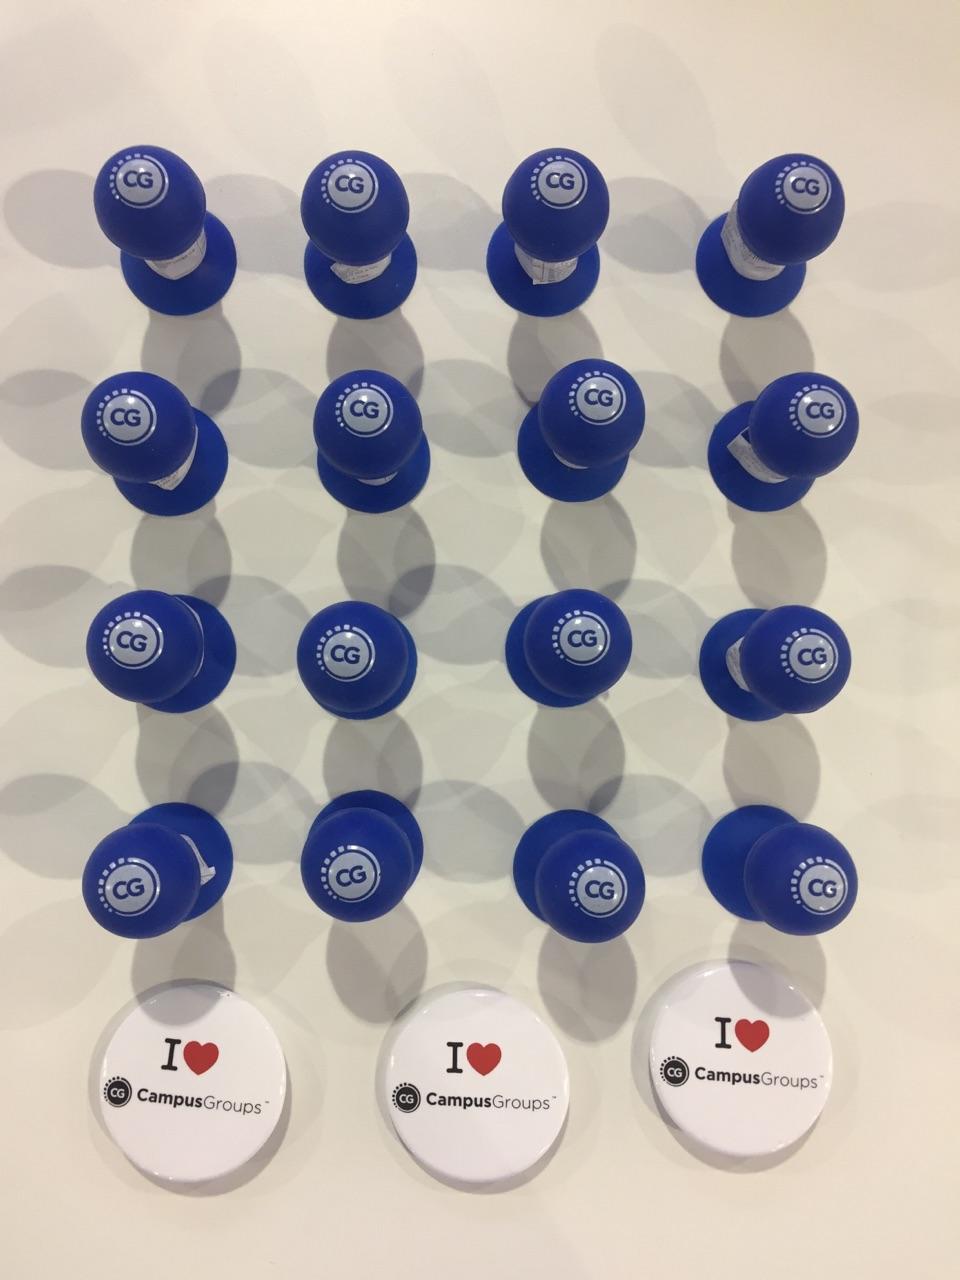  No conference is complete without a little branded swag. These blue suction-cup phone stands were our most popular item by far. 